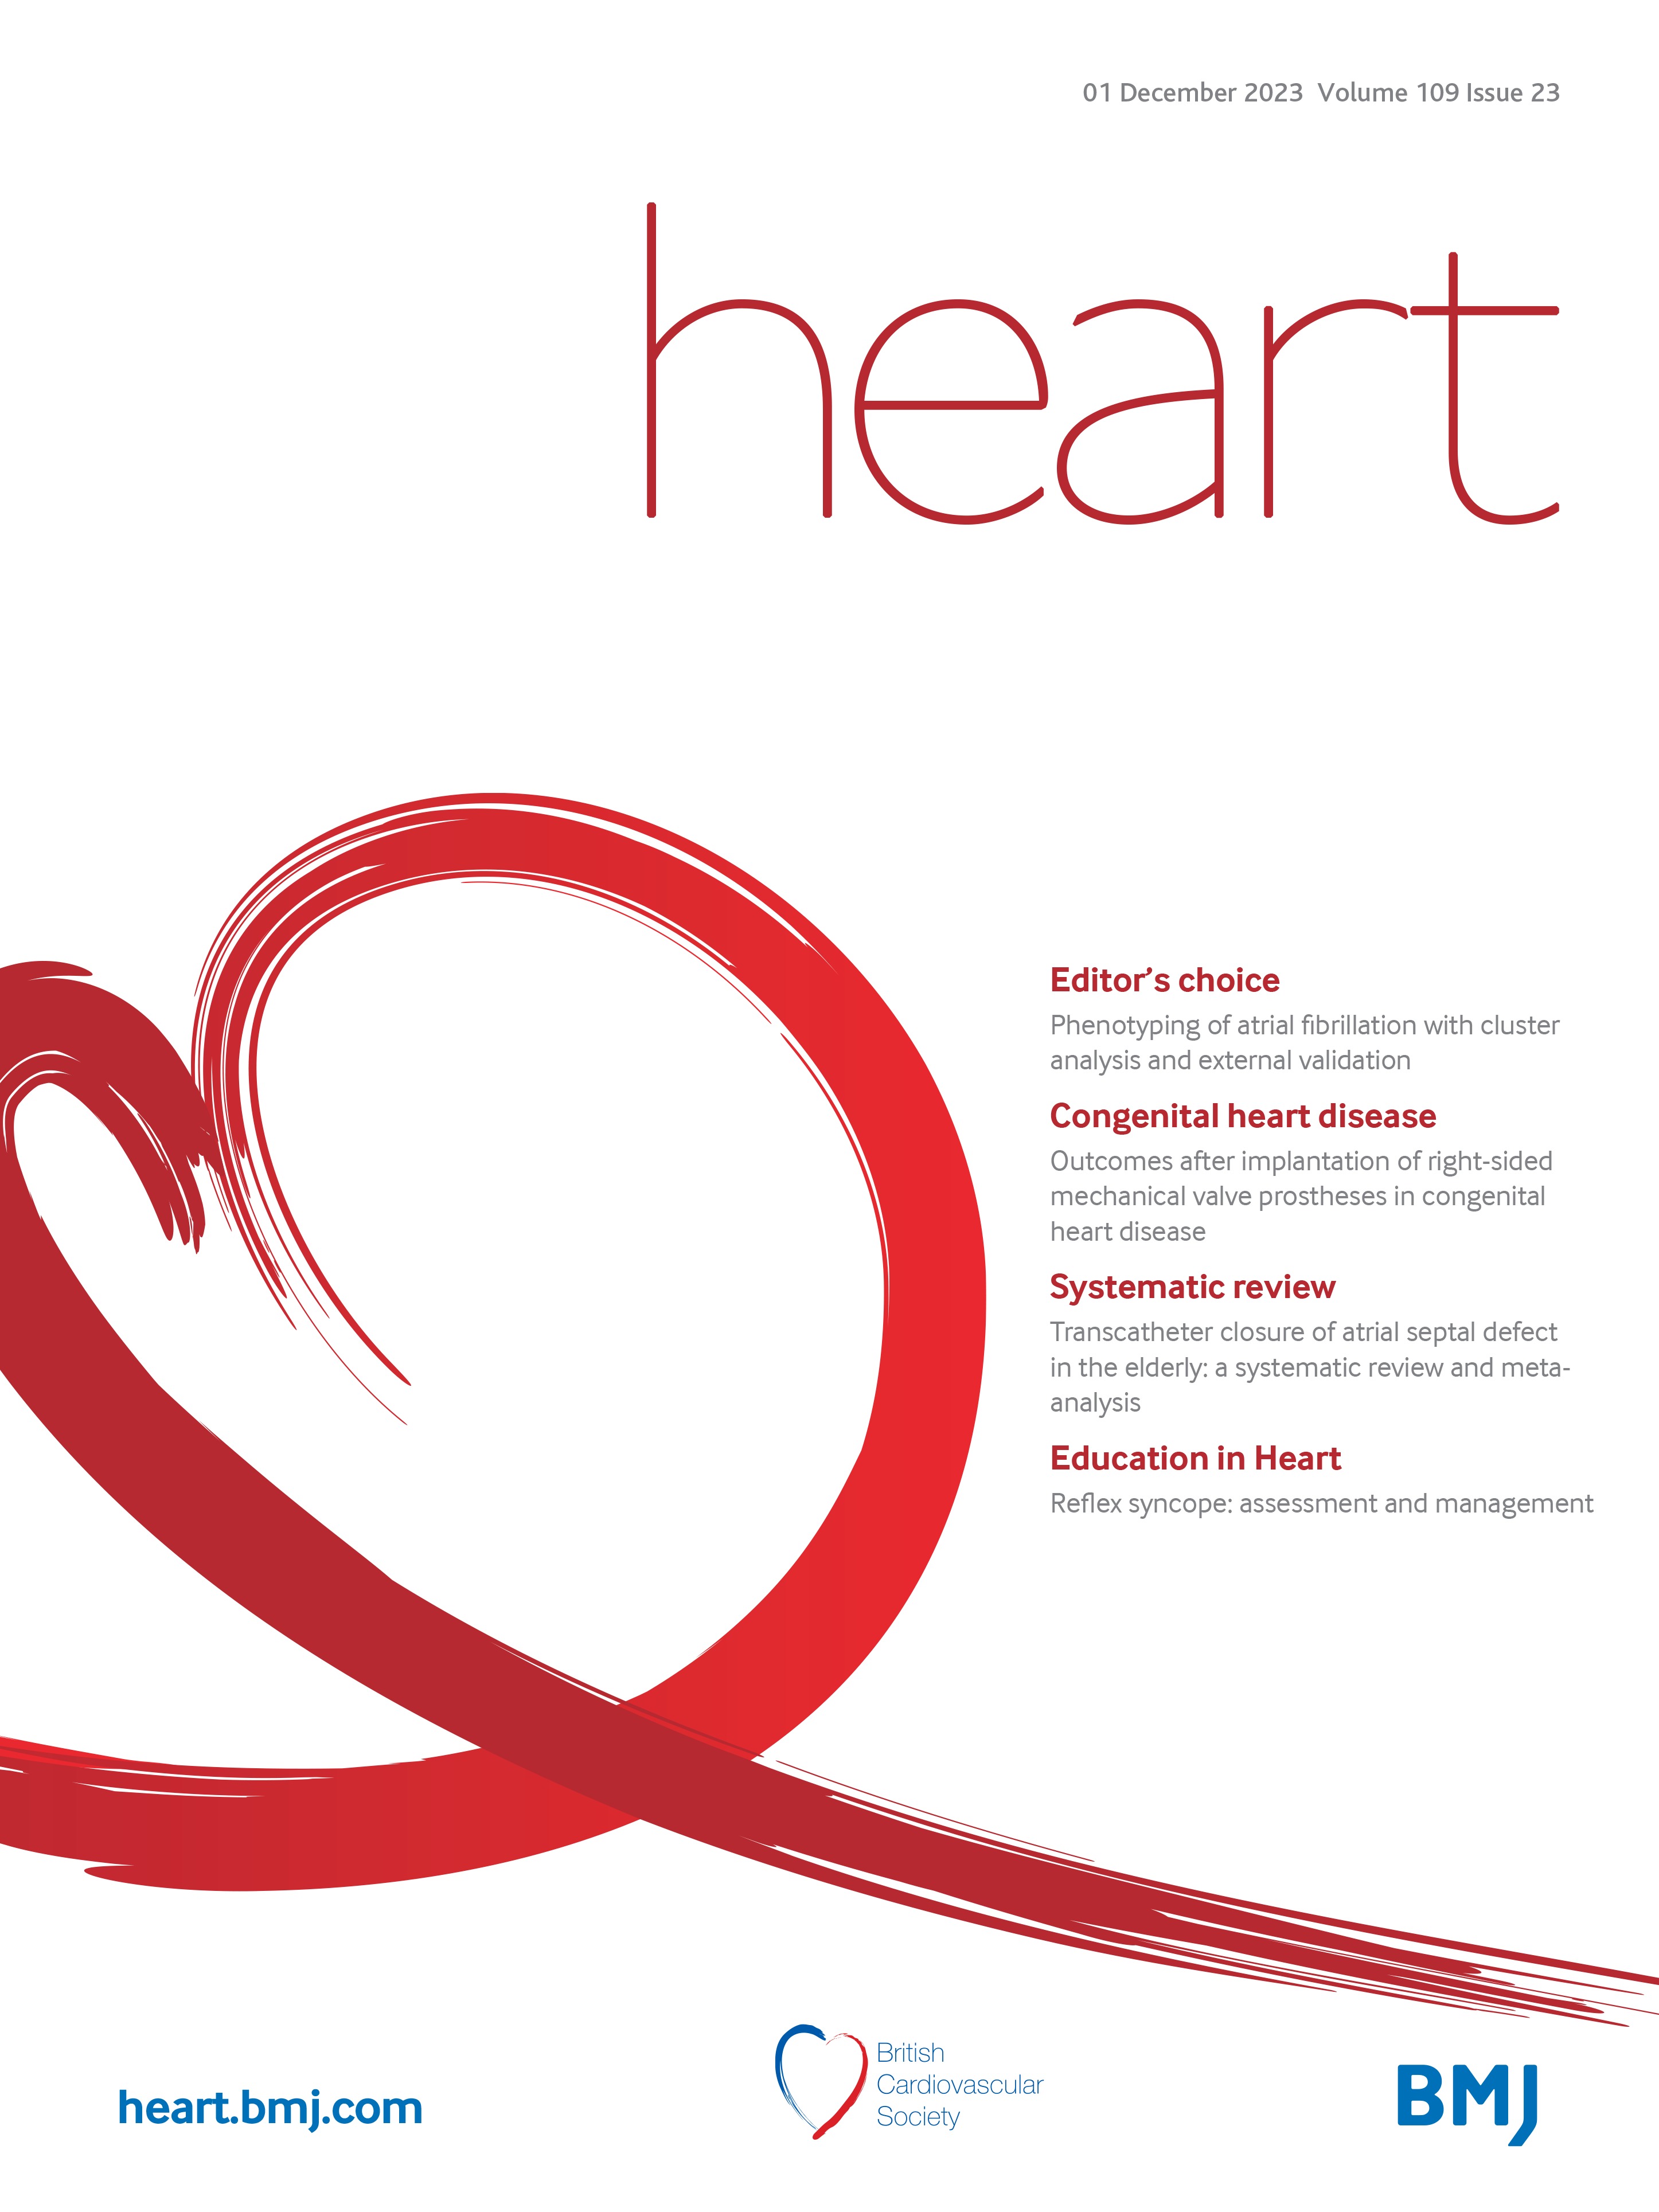 Right-sided mechanical valve prostheses in adults with congenital heart disease